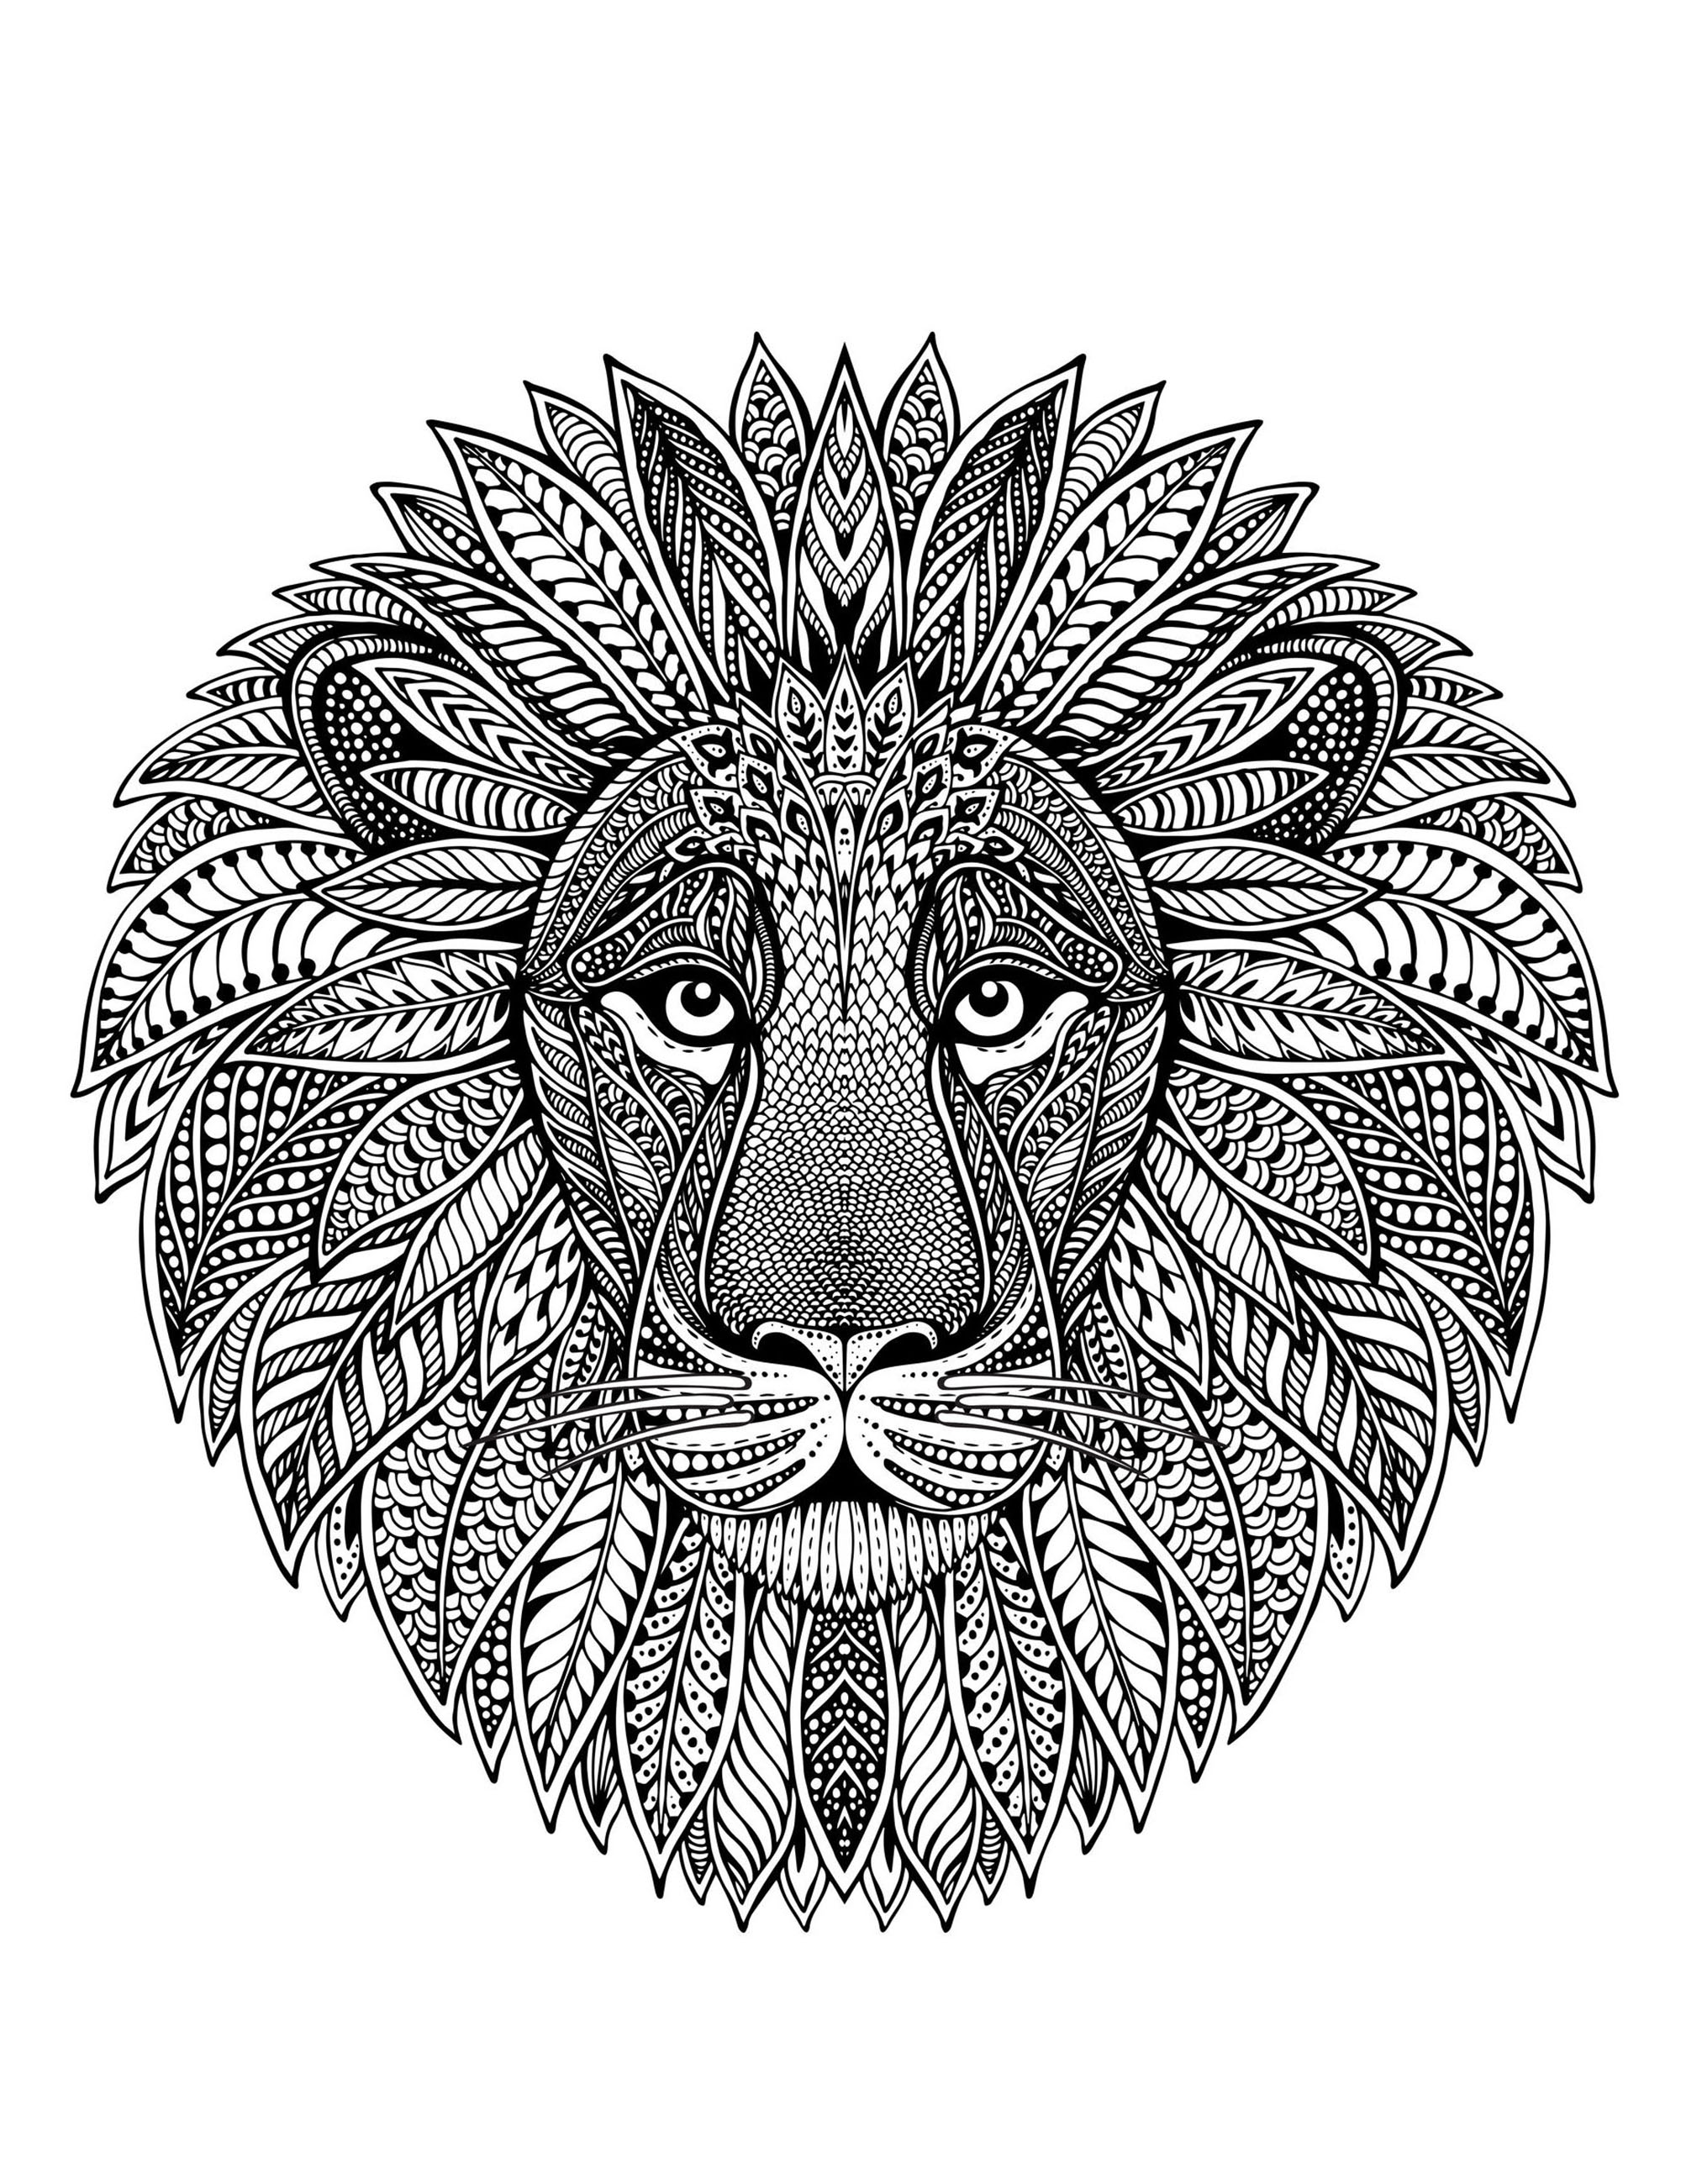 This very detailed lion head design is just waiting to be colored in this pretty original Mandala, it's up to you to print it and let your artistic sense guide you.